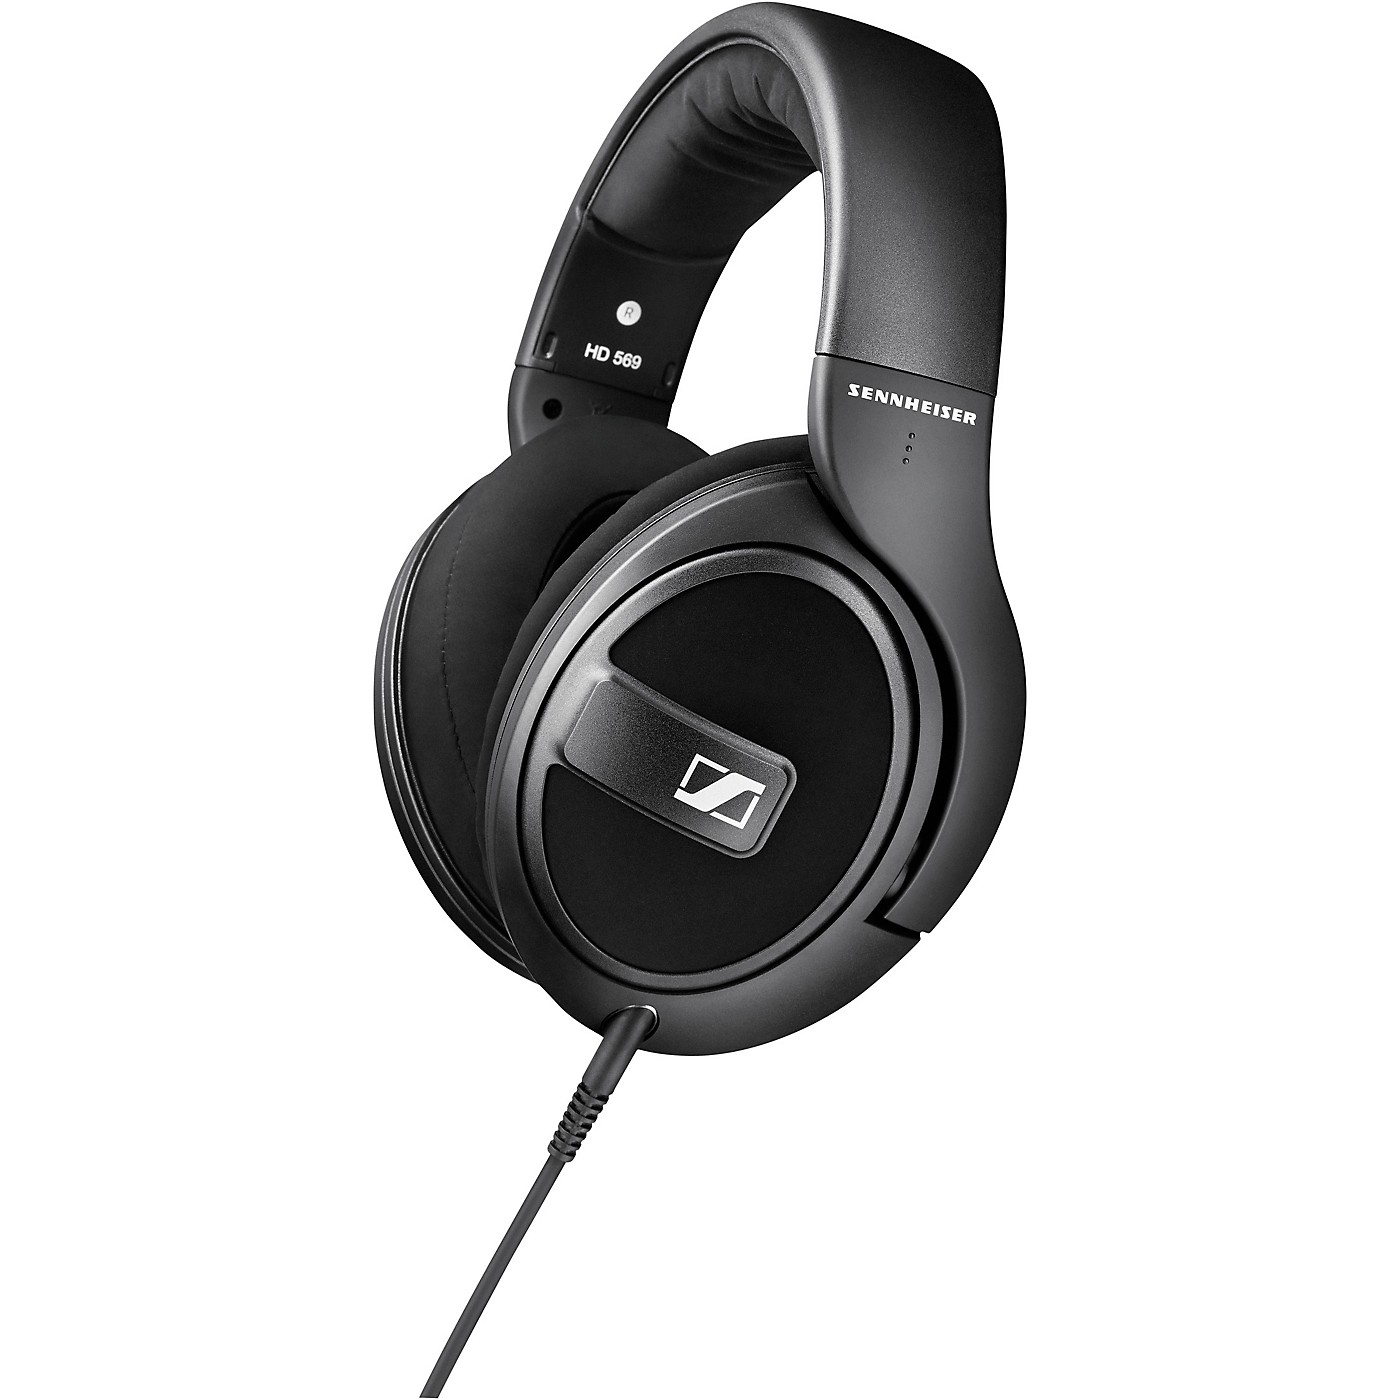 Sennheiser HD 569 Closed-Back Around-Ear Headphones with One-Button Remote Mic in Black thumbnail